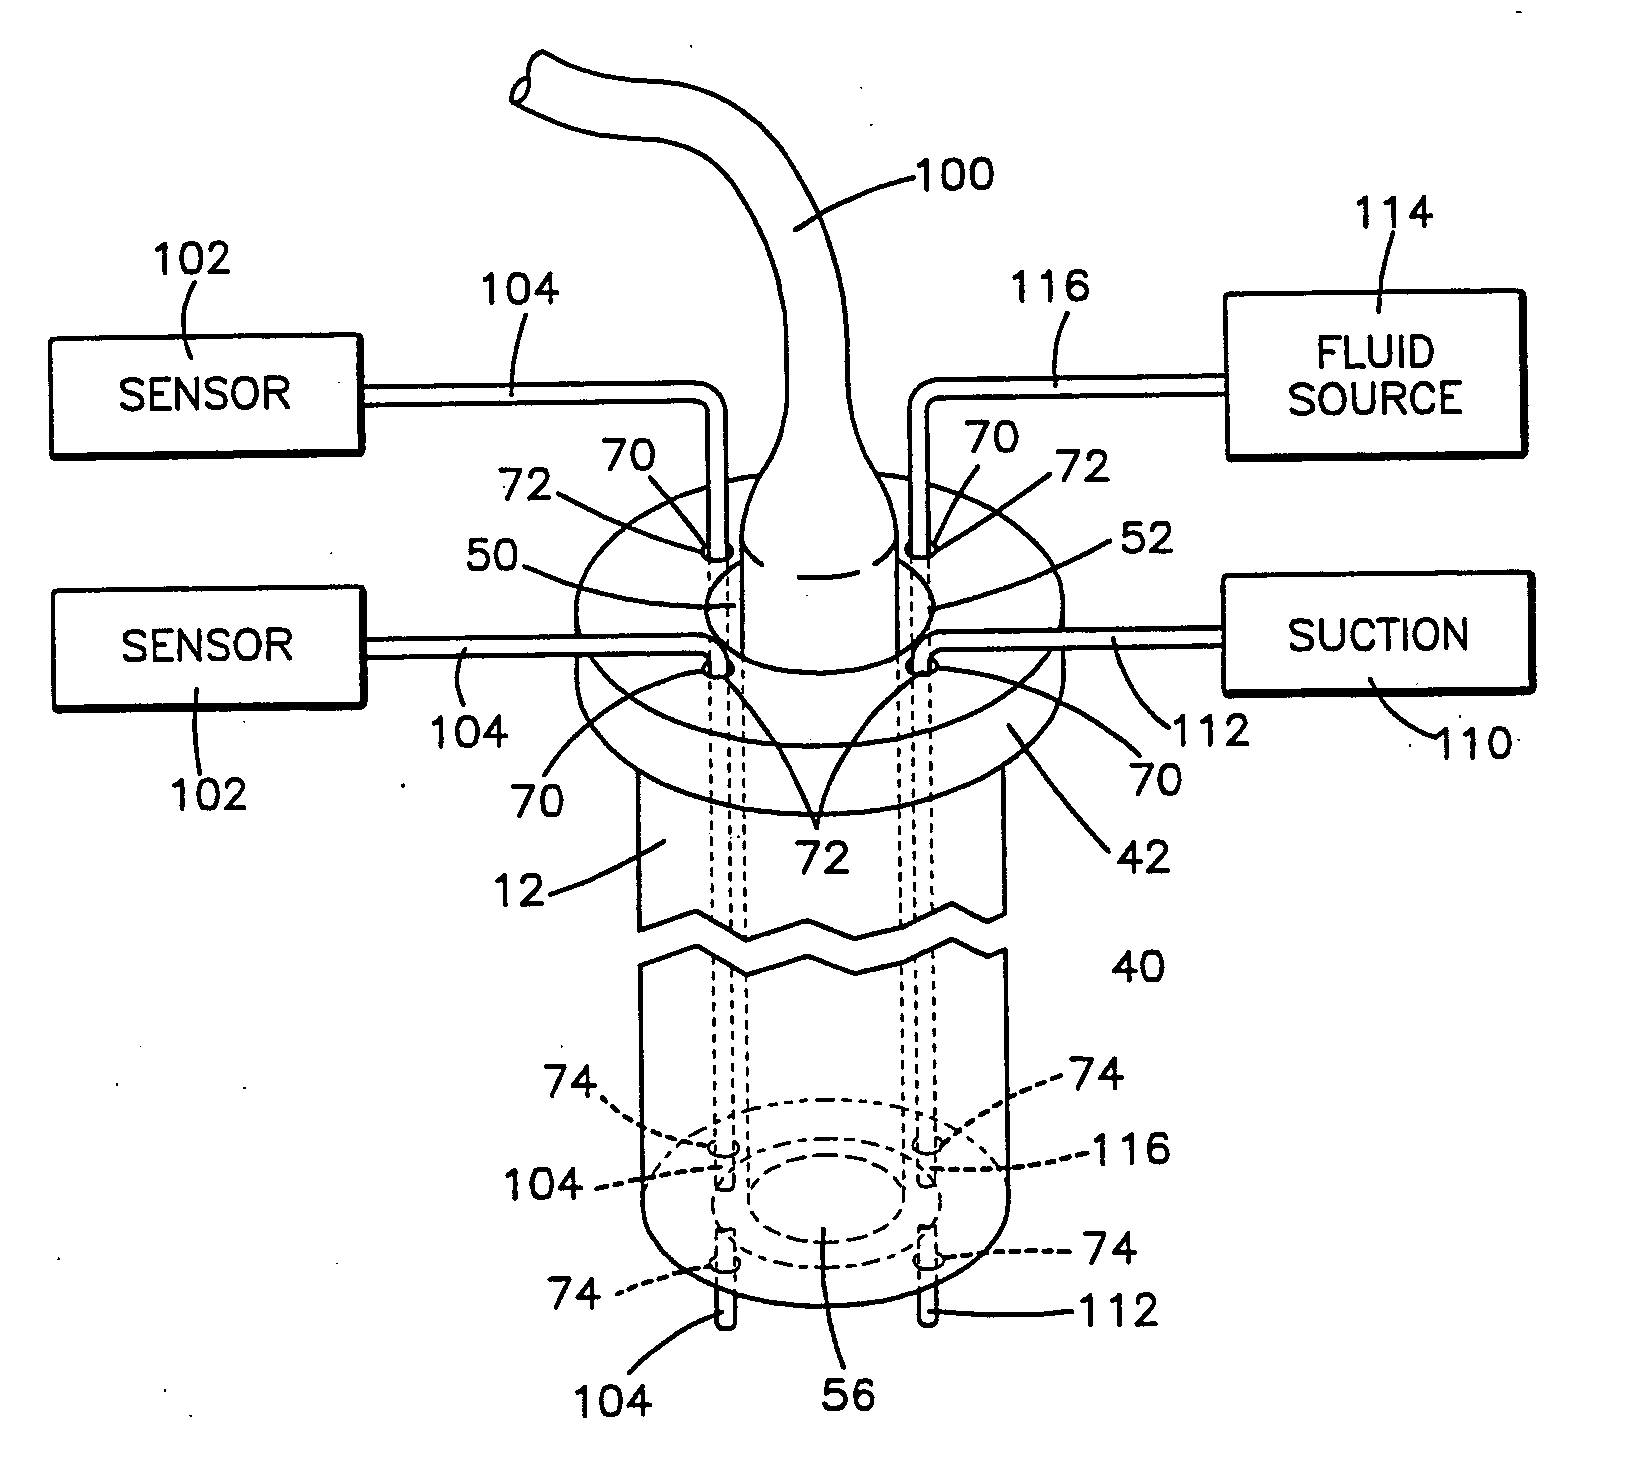 Apparatus for facilitating delivery of at least one device to a target site in a body